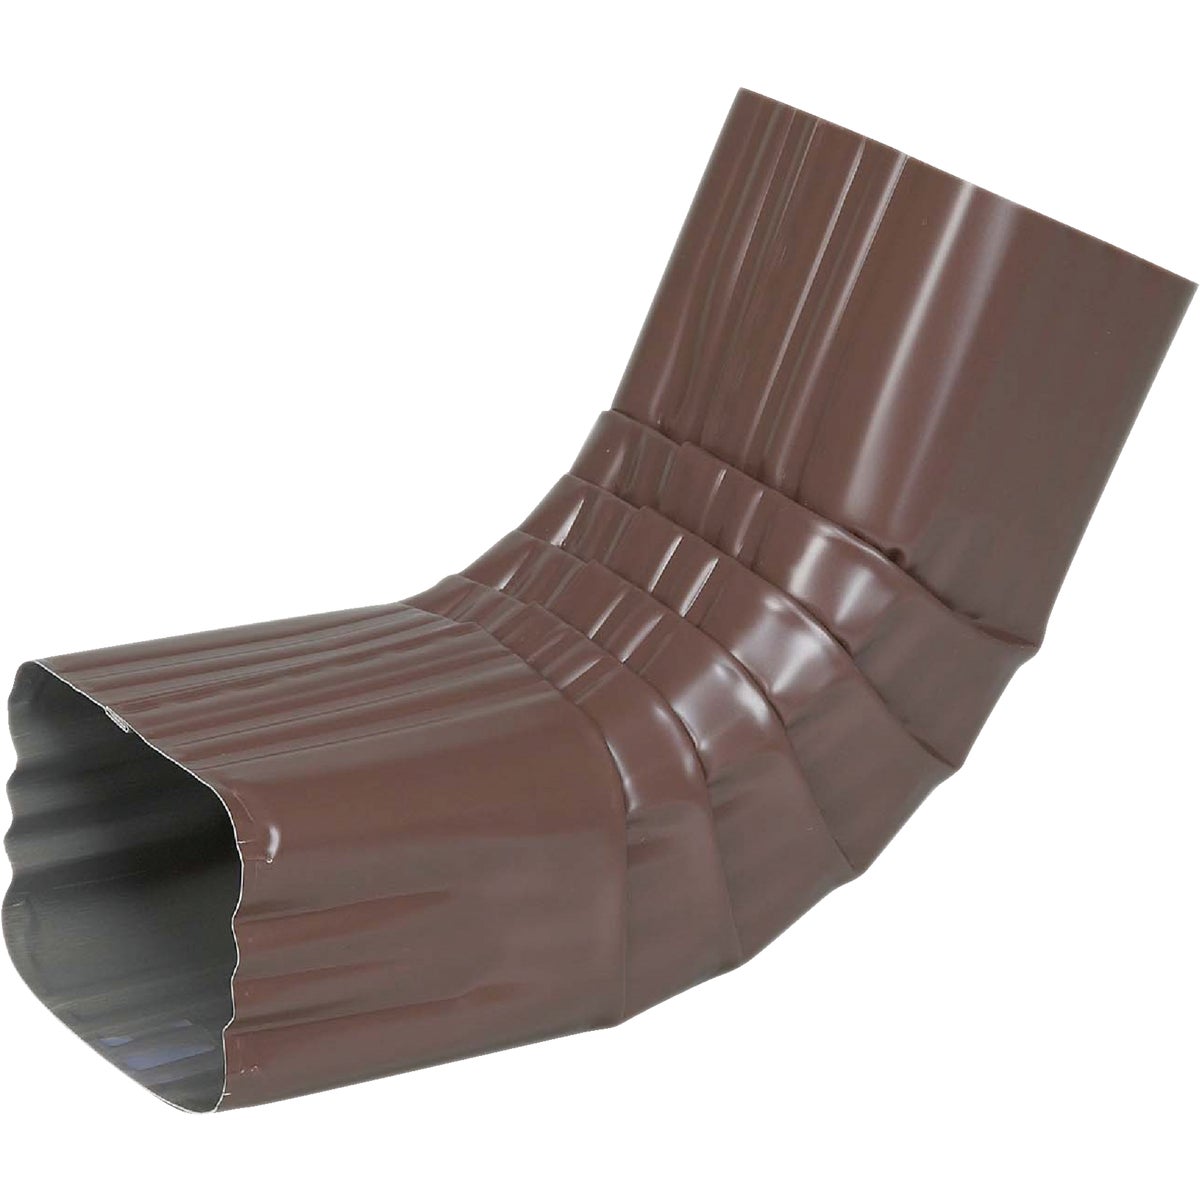 Spectra Metals 4AELRTB Spectra Metals 3 x 4 In. Aluminum Brown Front Downspout Elbow 4AELRTB